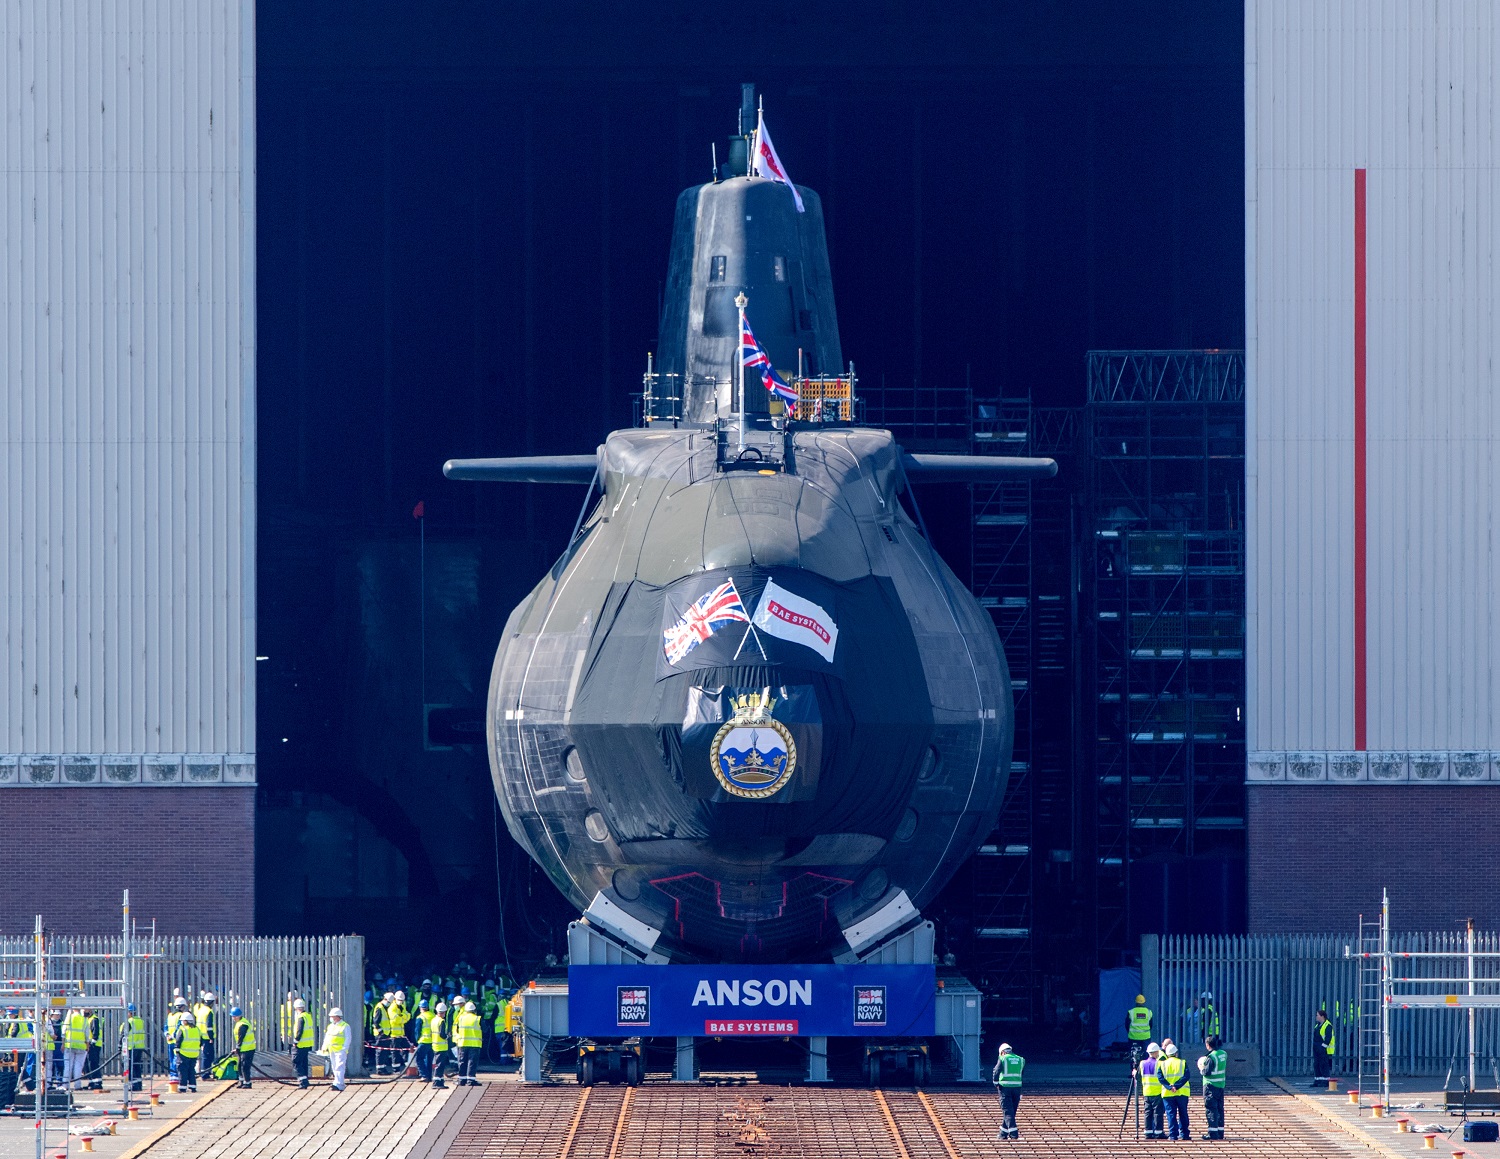 HMS Anson (S123) Submarine Enters Final Stage of Construction and Commissioning